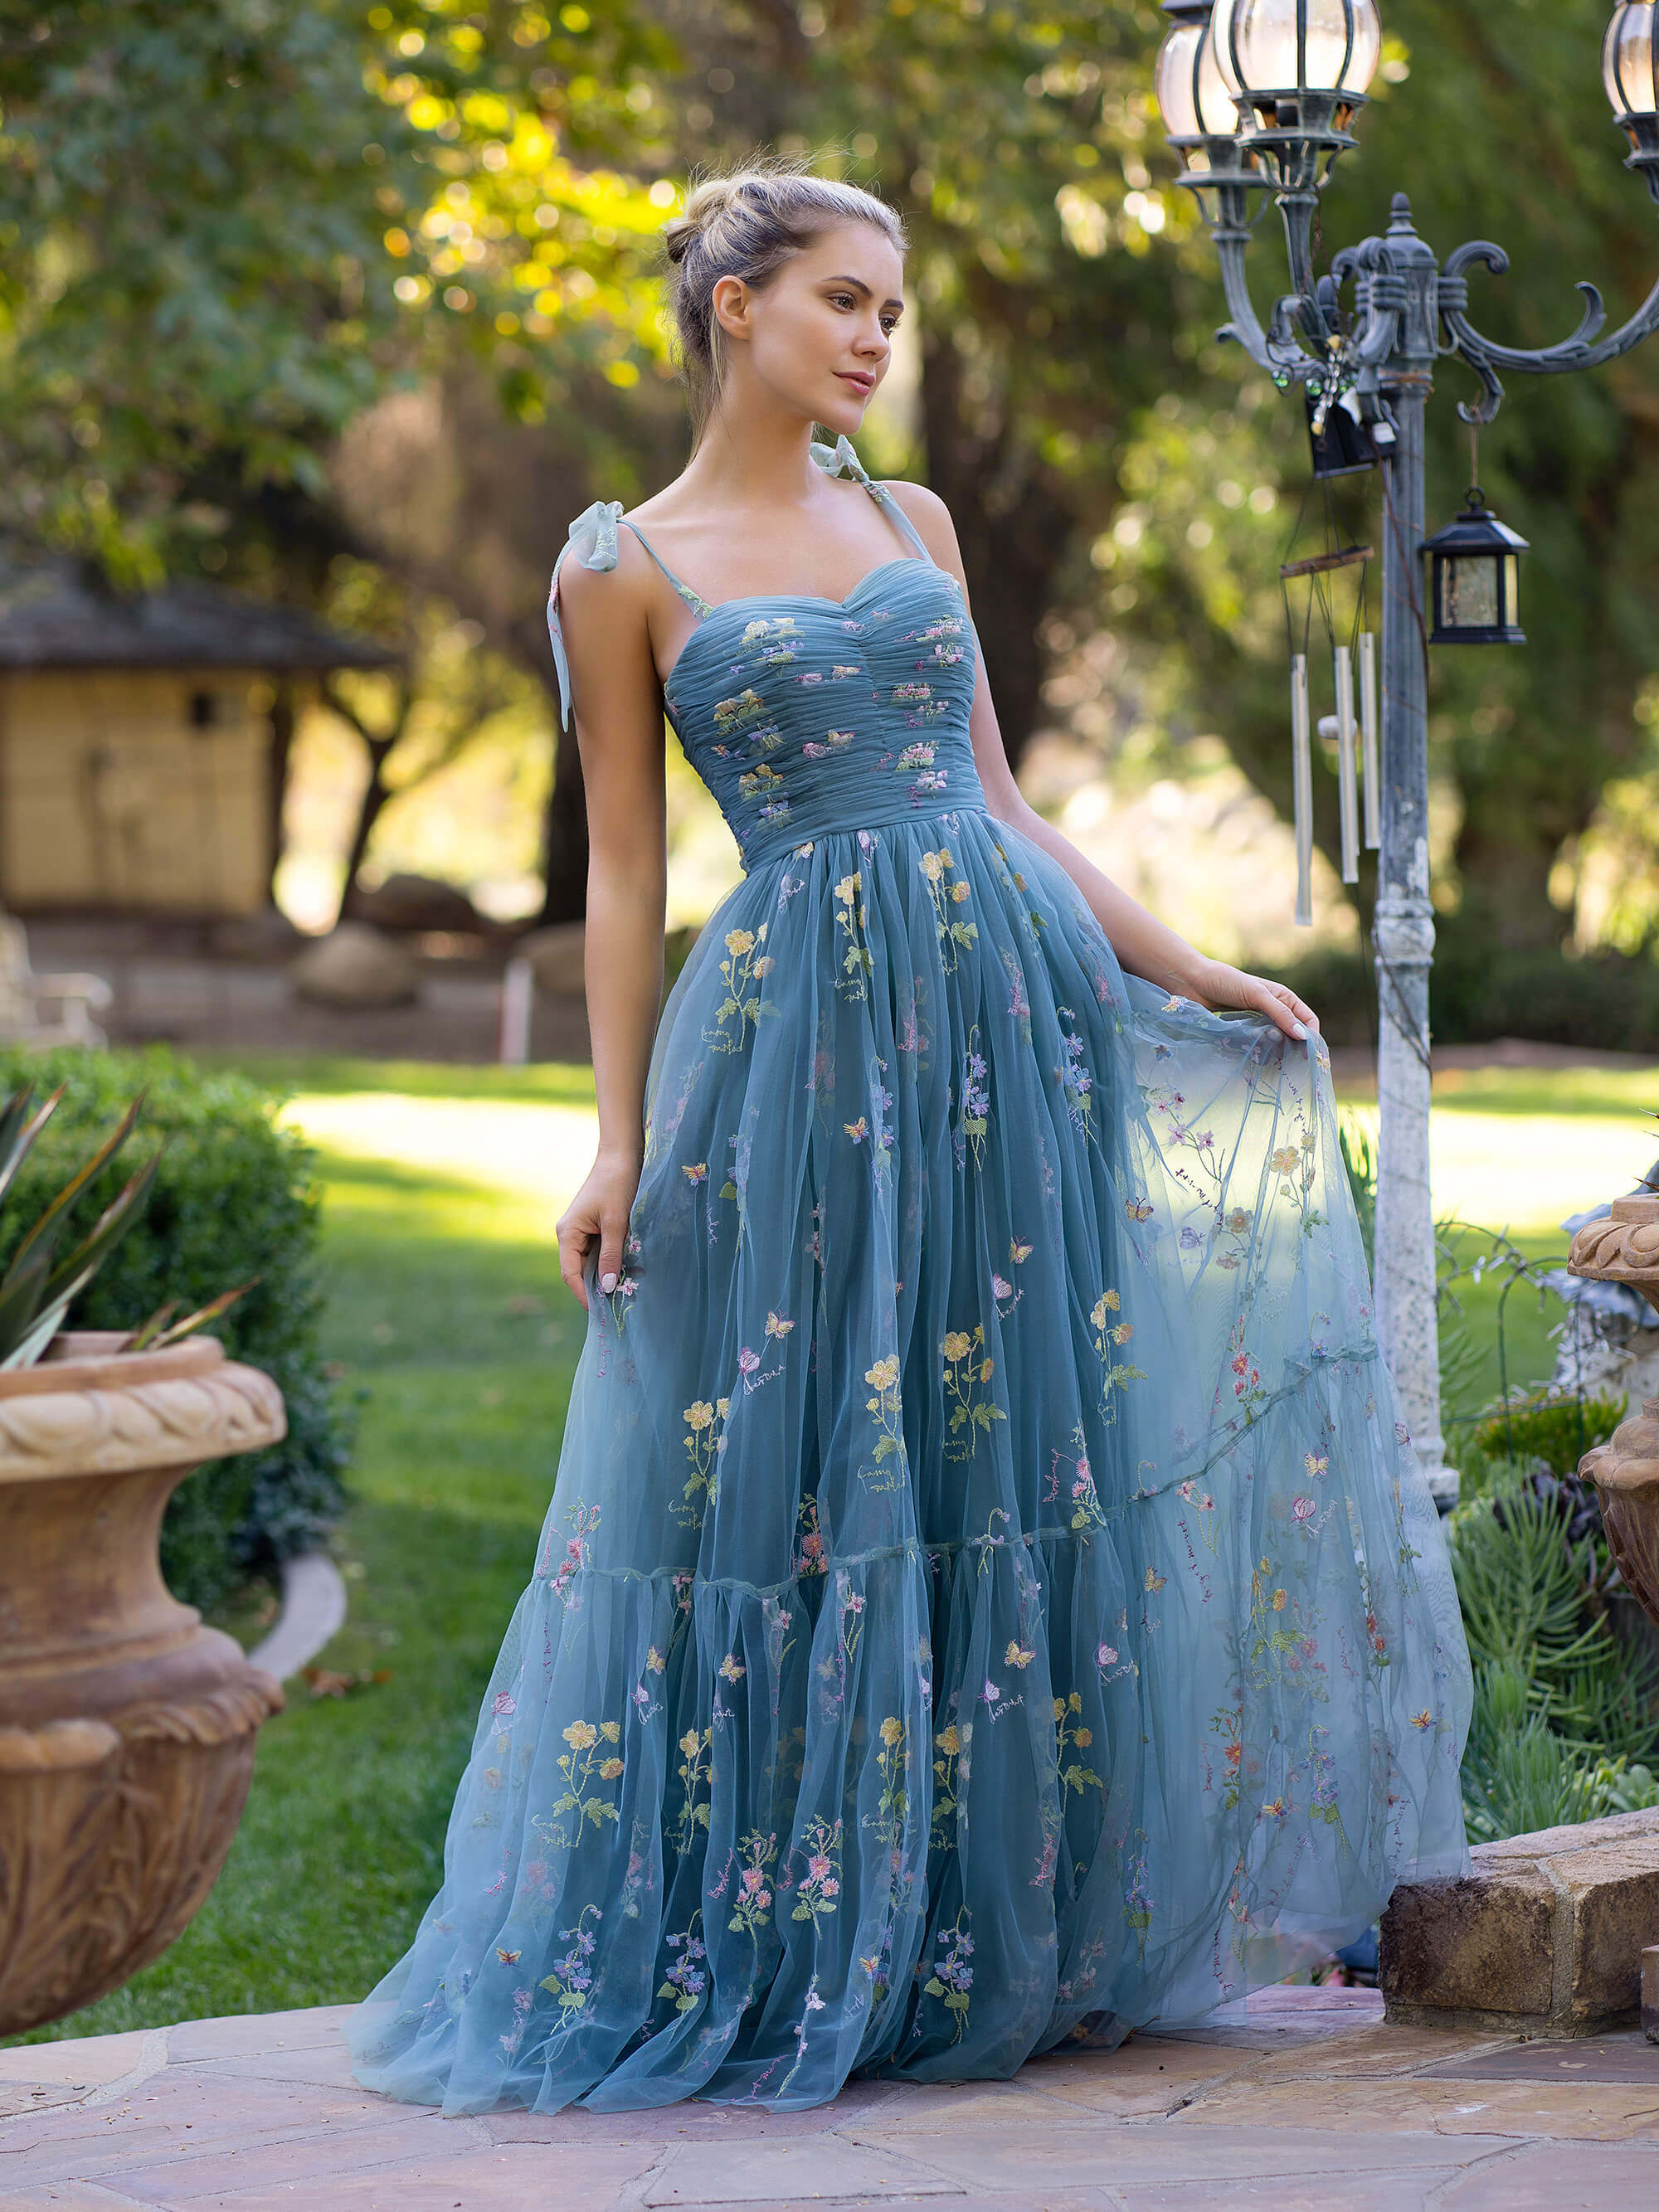 What Do You Wear Under Prom Dresses? - Prom Dresses & Bridesmaid Dresses